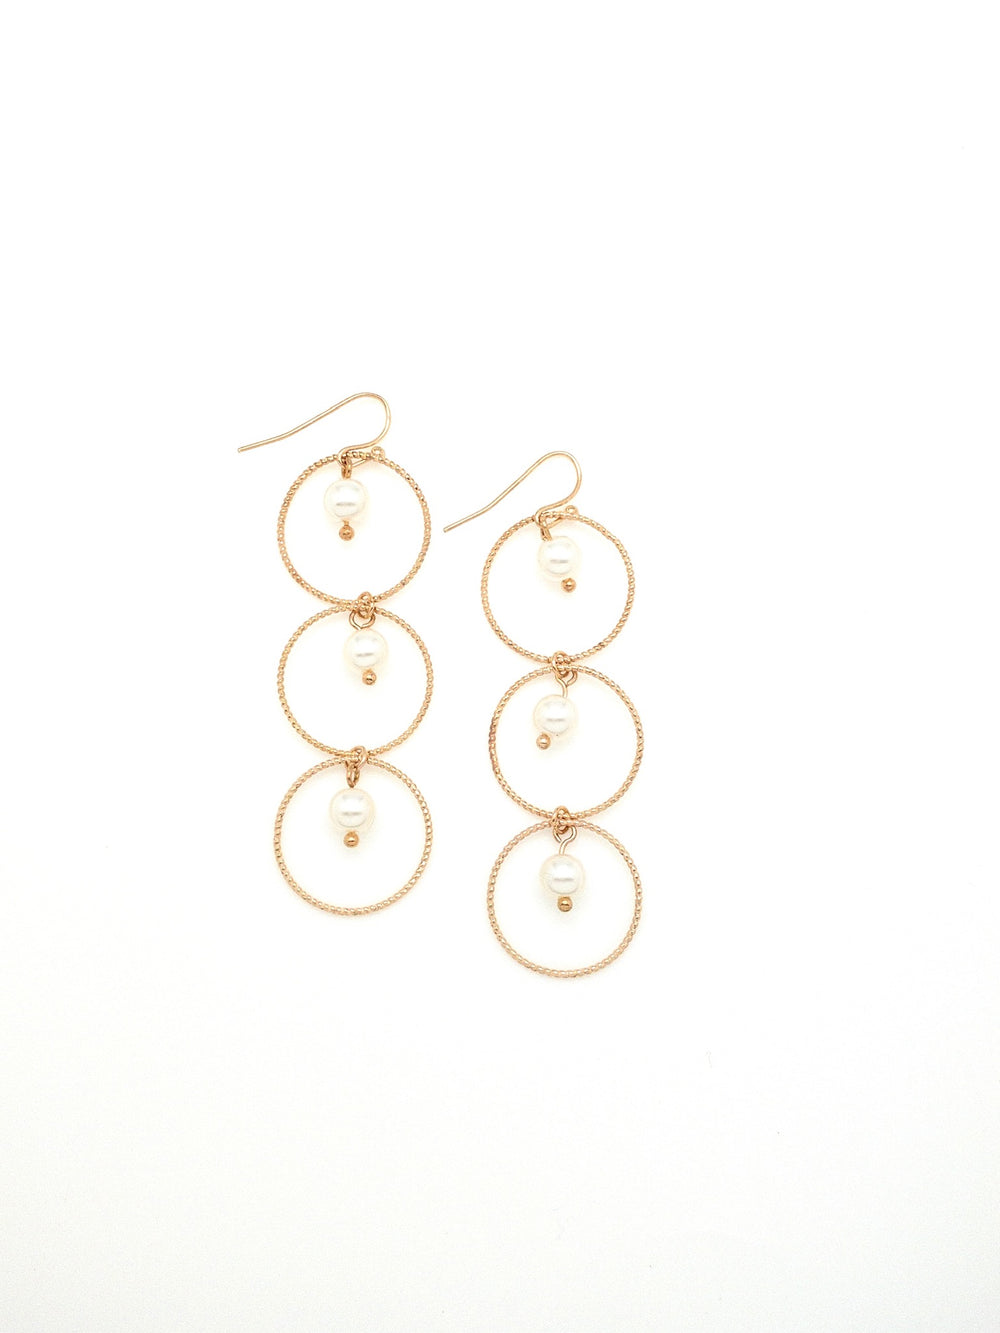 Christina earrings. 3 gold circles with pearl in center of each